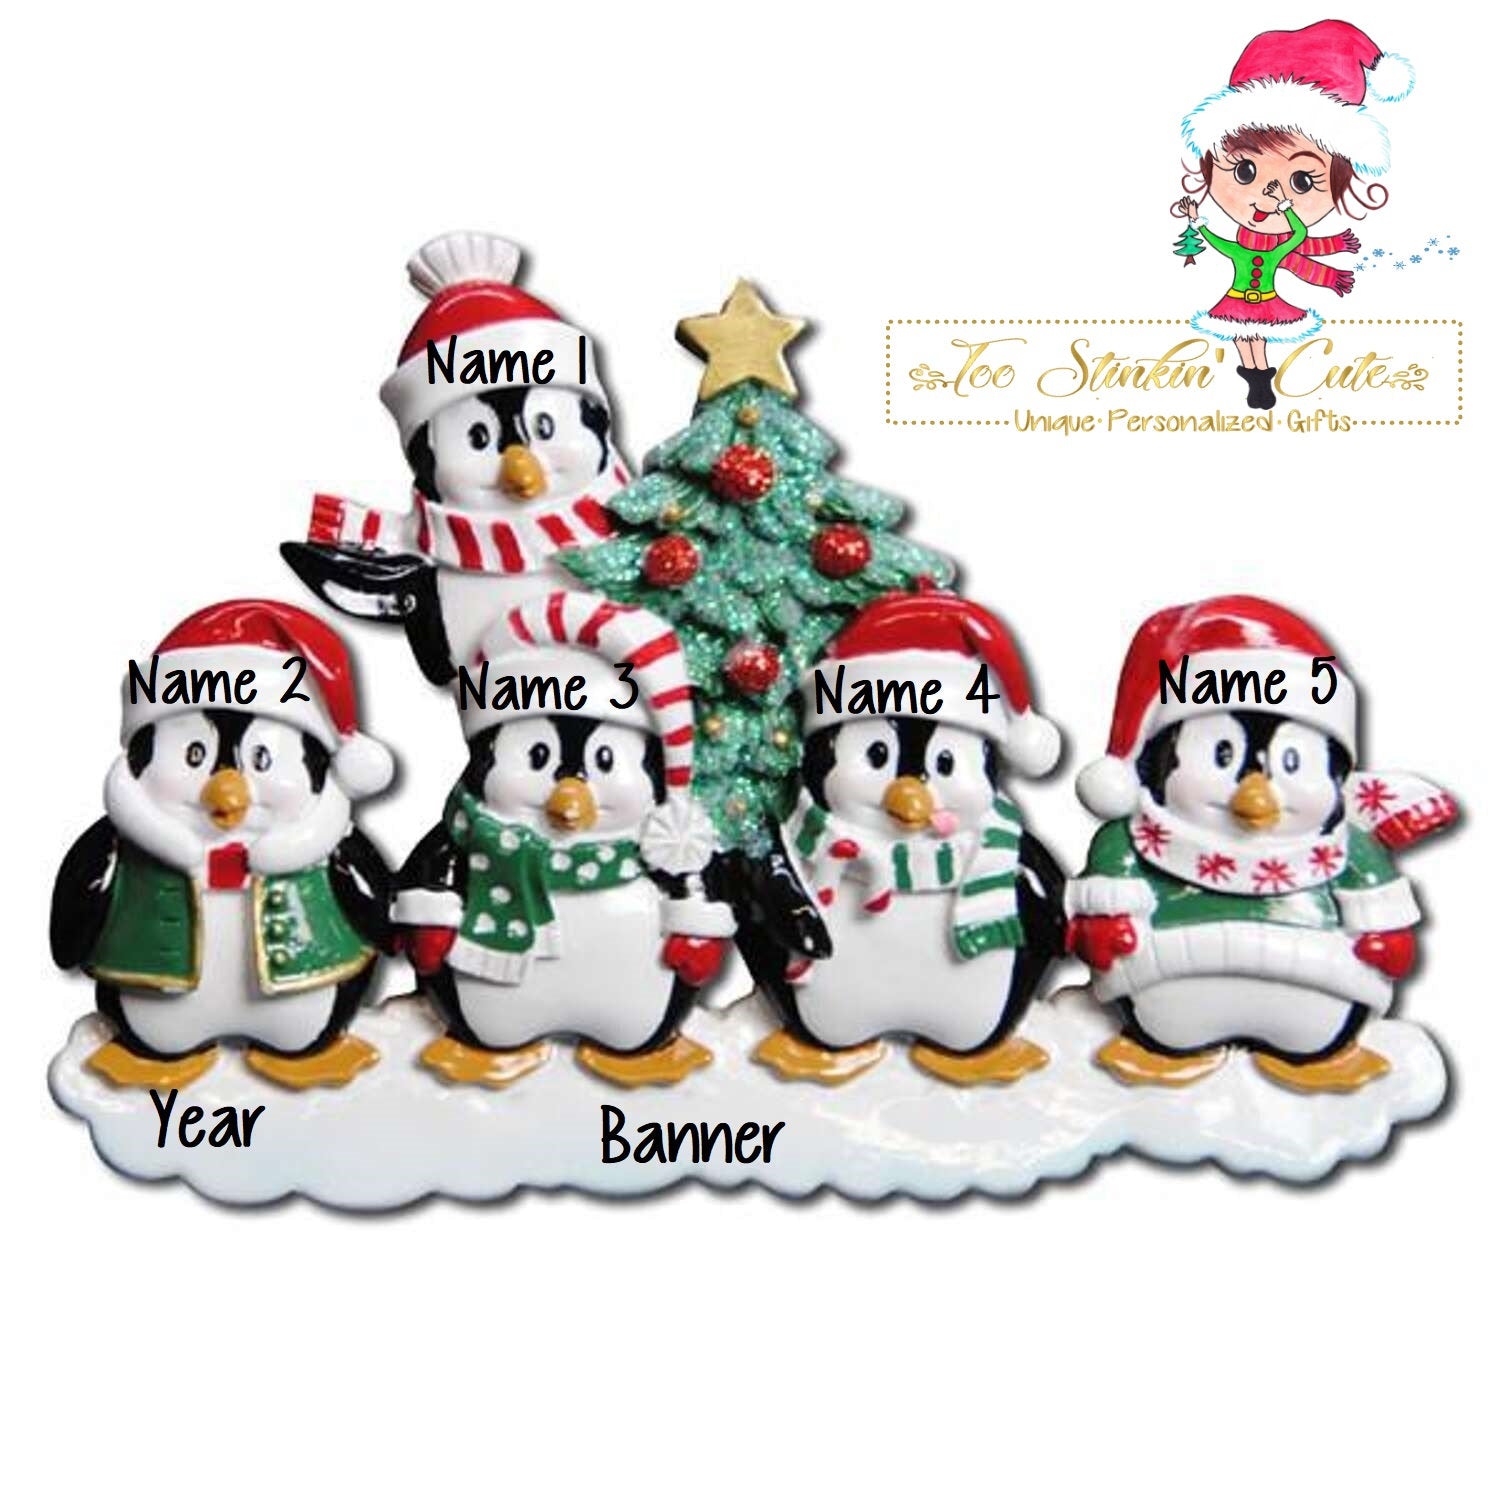 Christmas Ornament Winter Penguin Tree Family of 5/ Friends/ Coworkers - Personalized + Free Shipping!